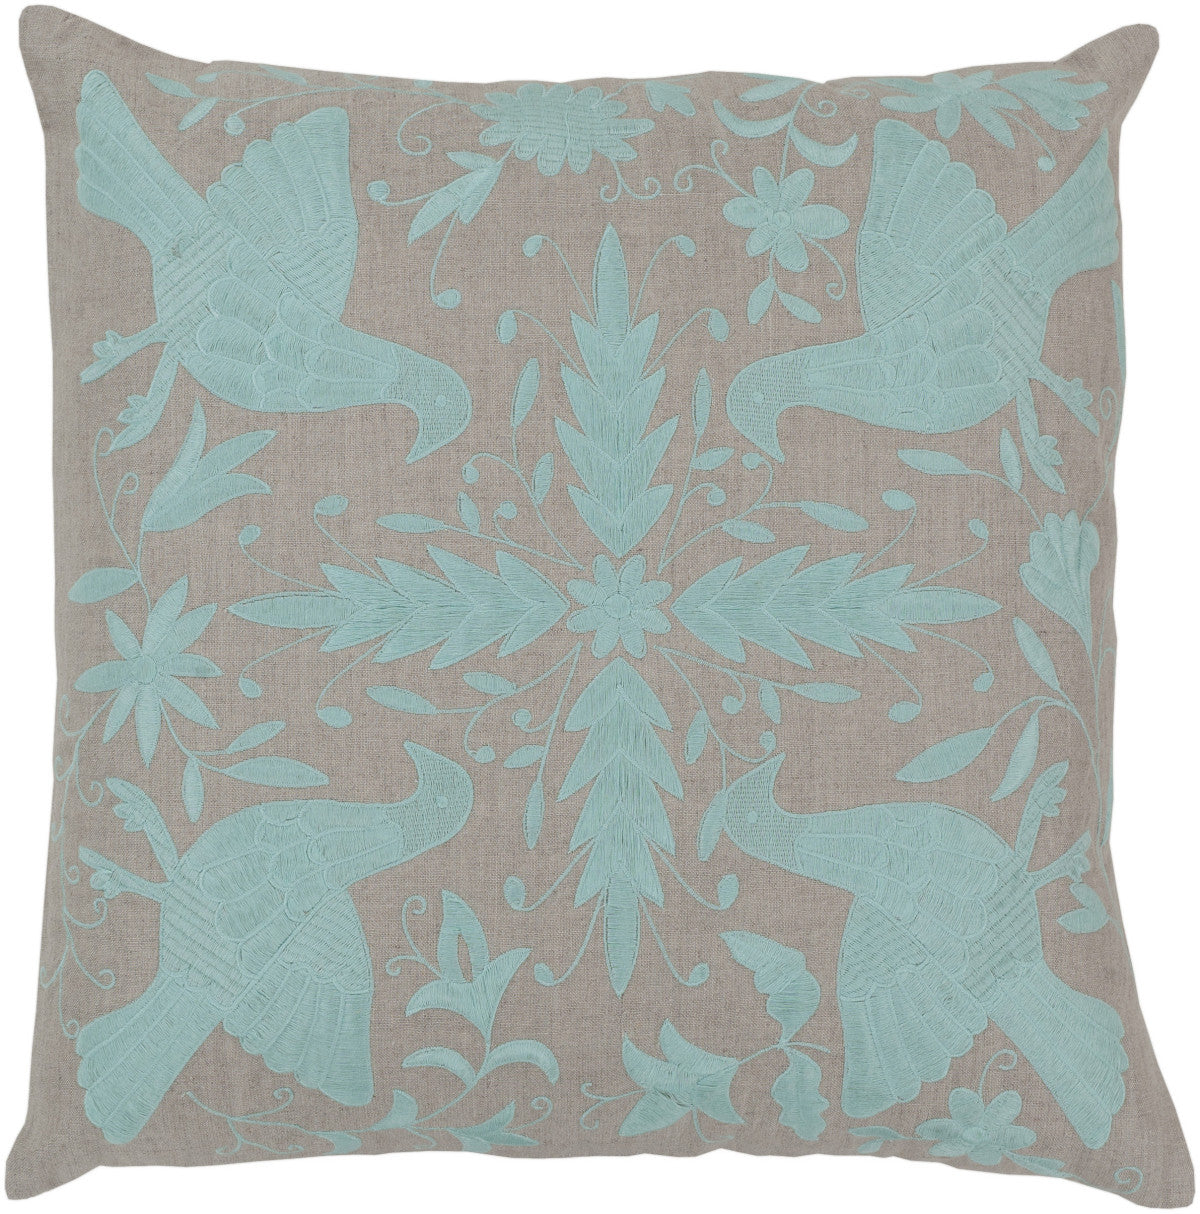 Surya Otomi Delicate Doves LD-019 Pillow by Beth Lacefield